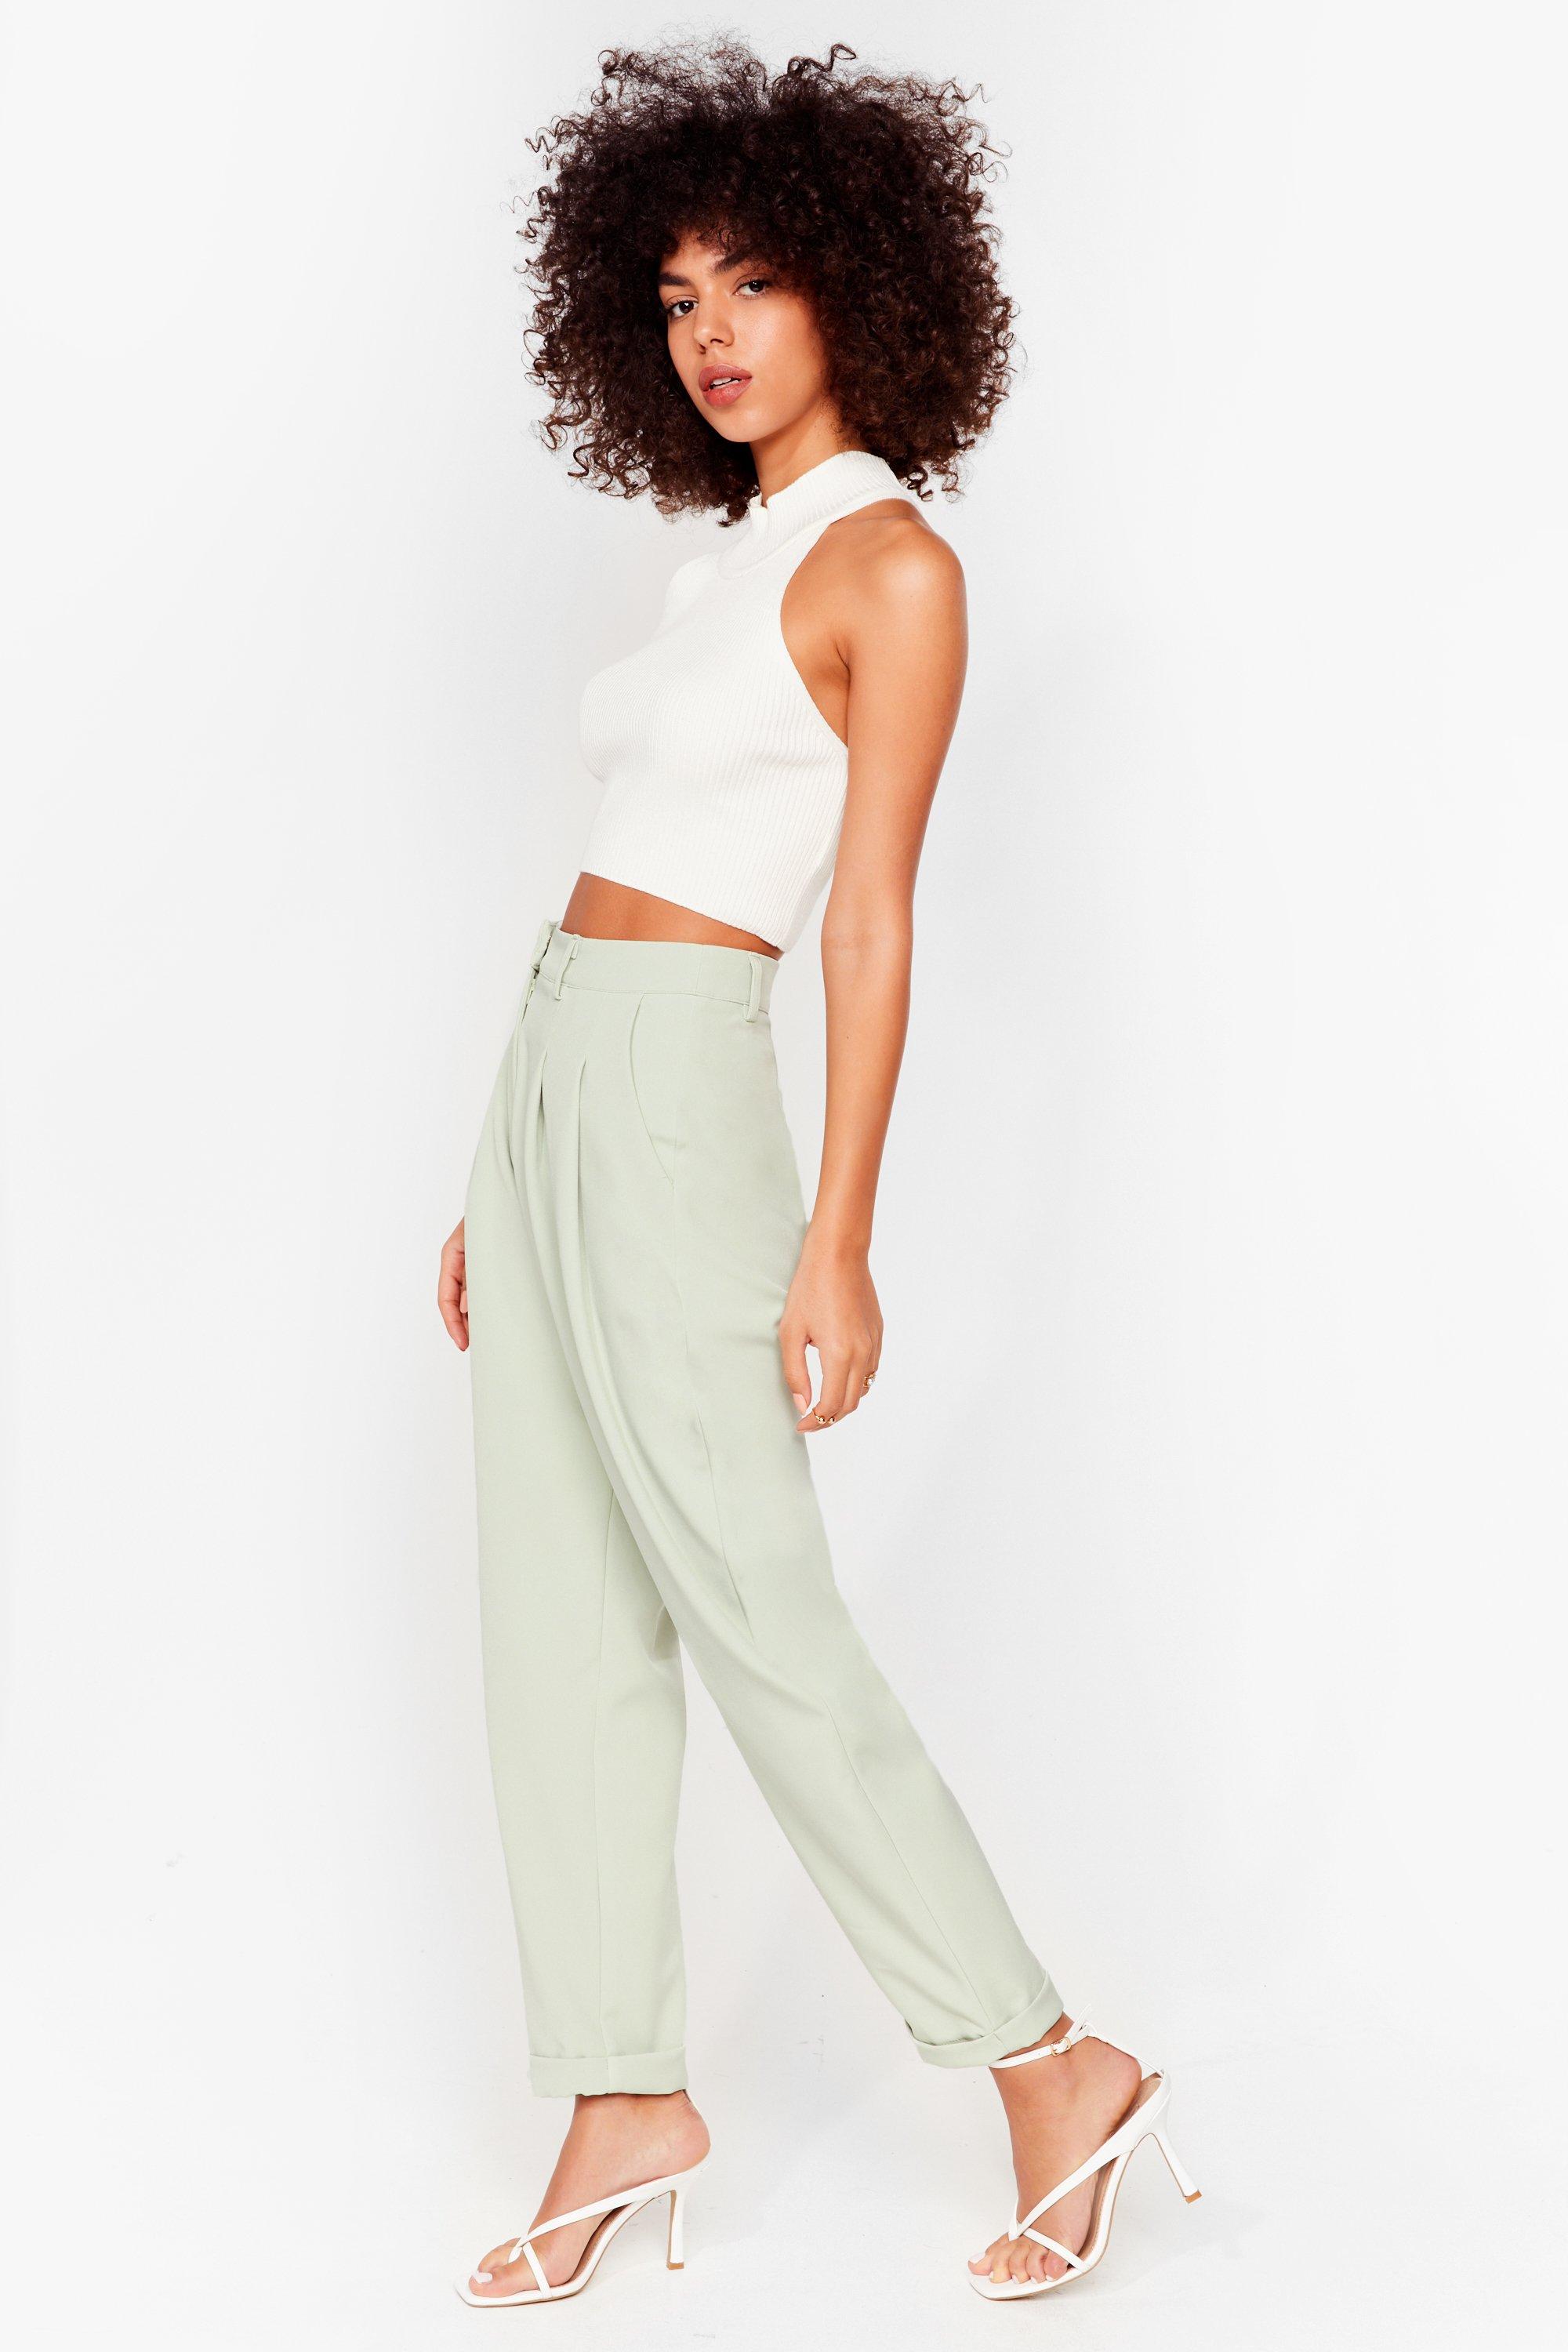 The Stakes Are High-Waisted Tapered Trousers